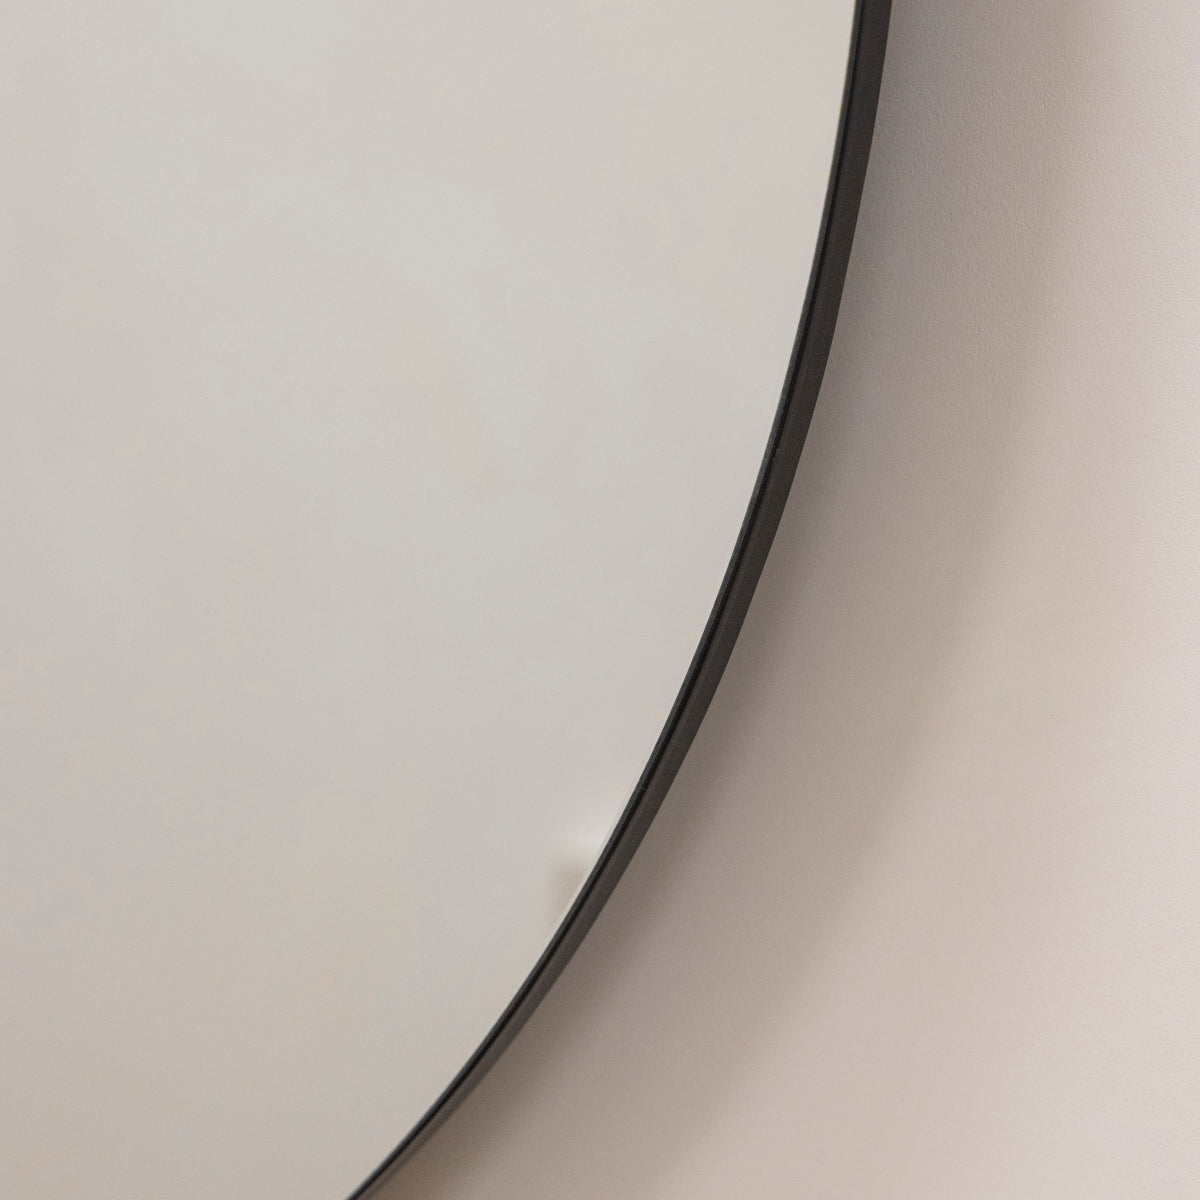 Large Frameless Round Wall Mirror detail shot of curve